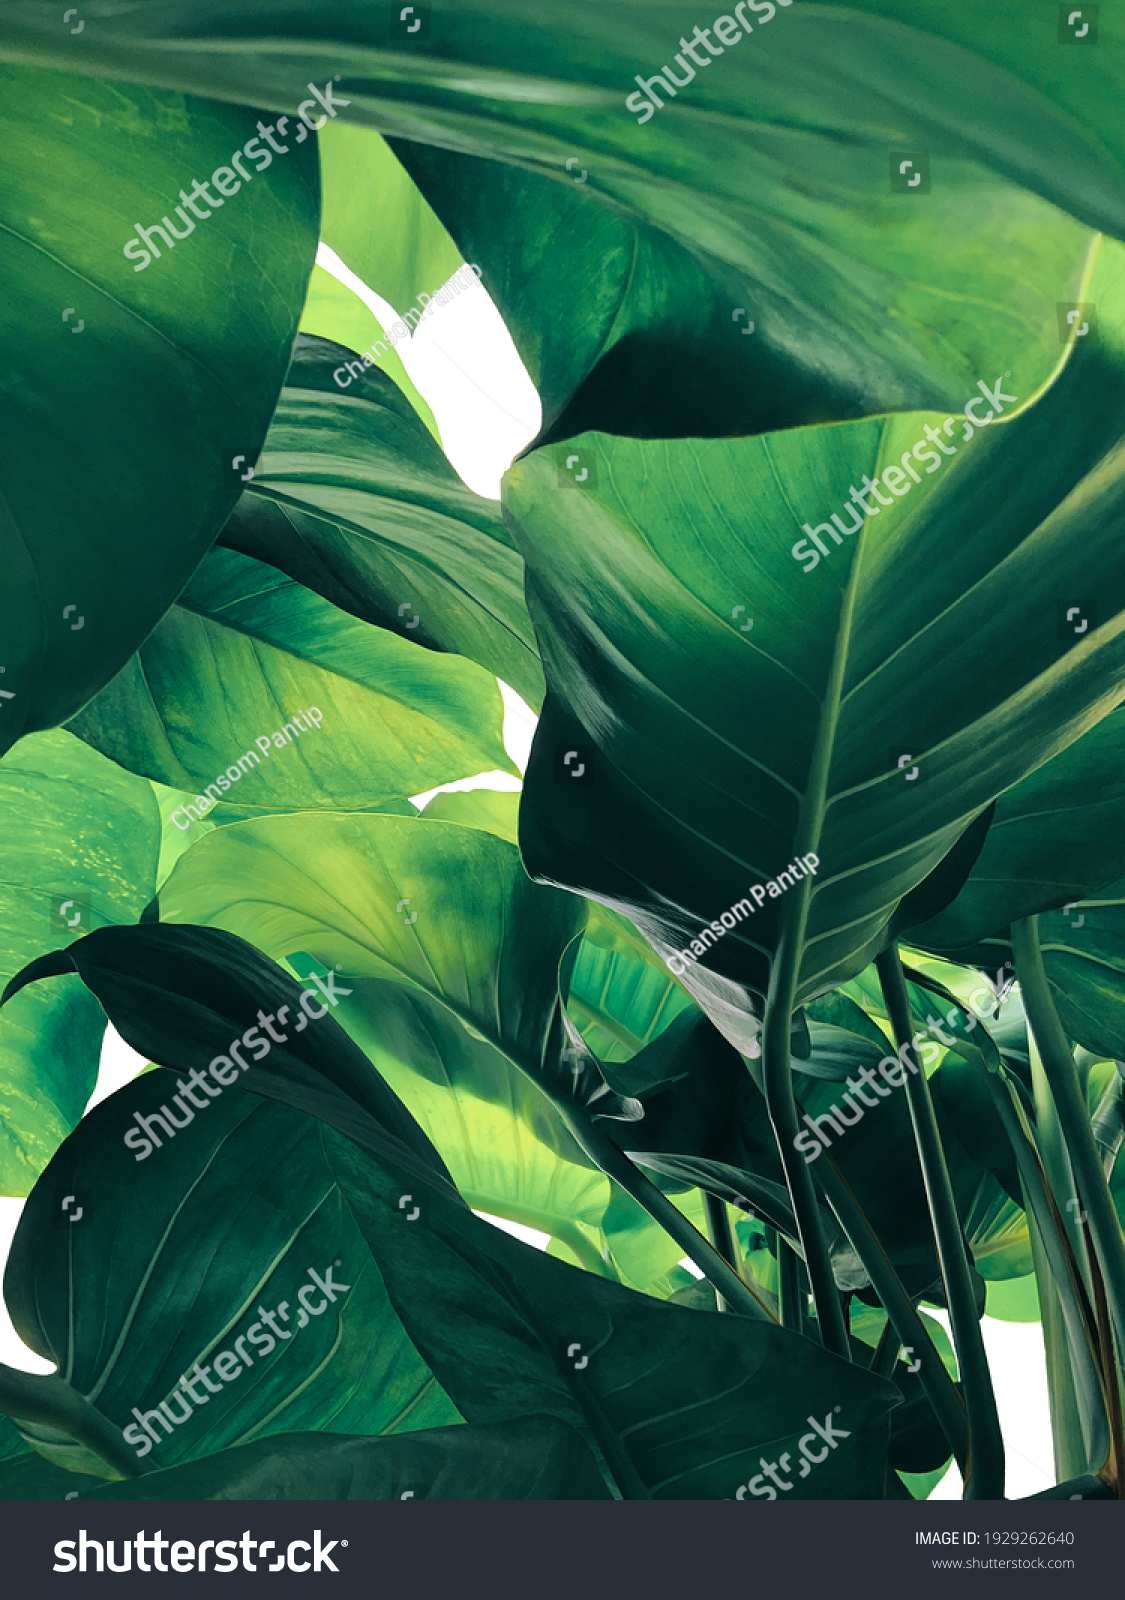 Abstract tropical green leaves pattern on white background, lush foliage of giant golden pothos or Devil’s ivy (Epipremnum aureum) the tropic plant. #1929262640